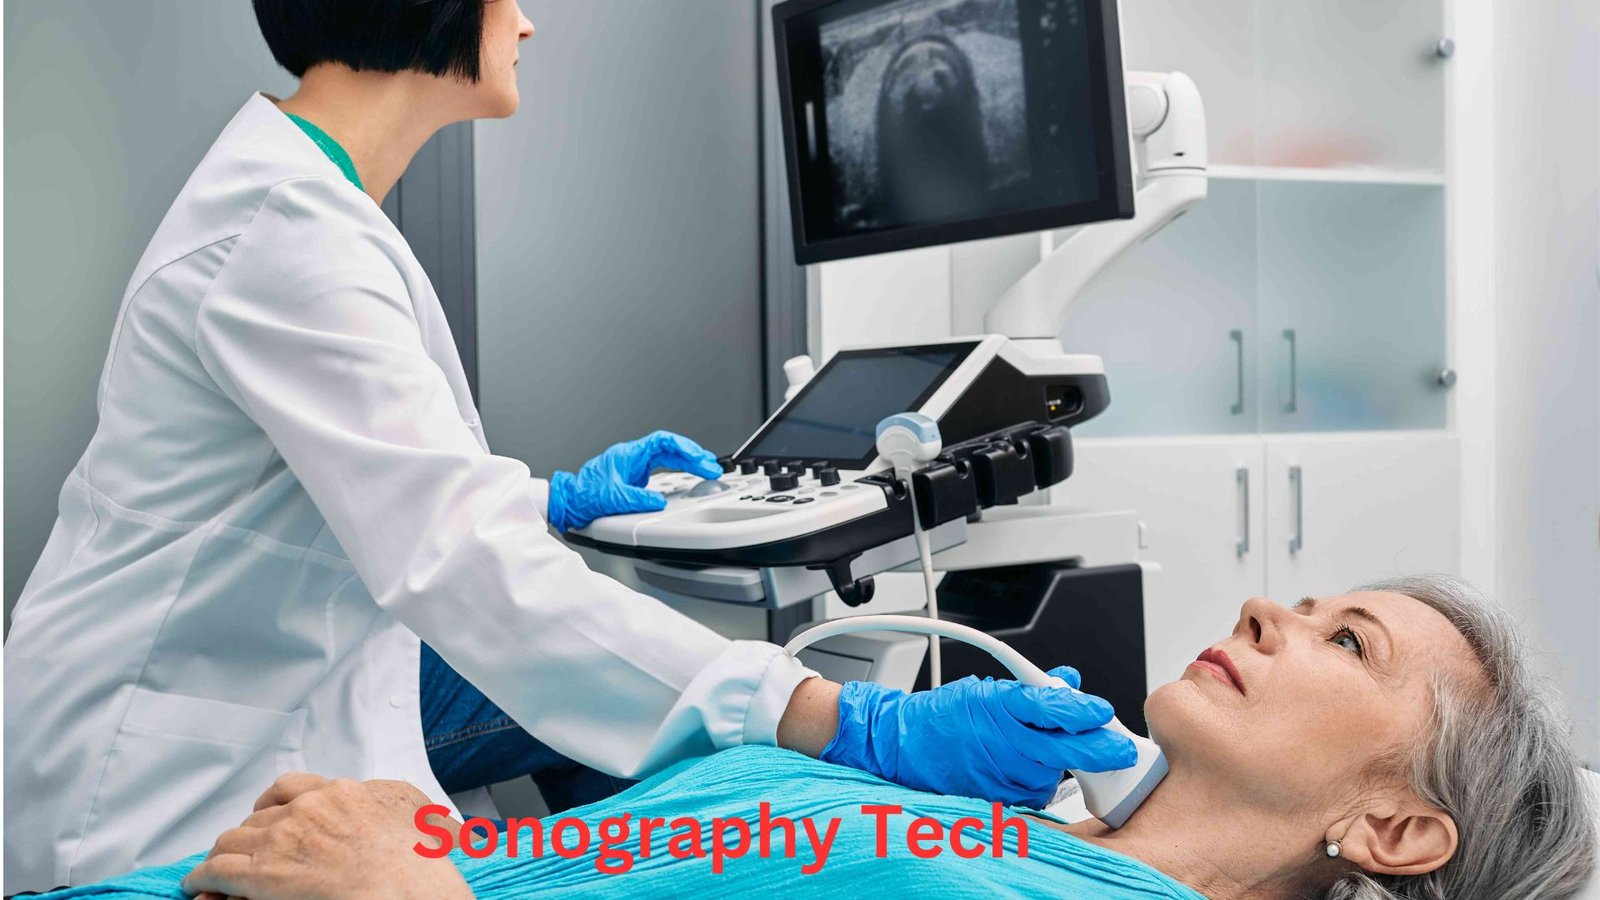 Sonography tech